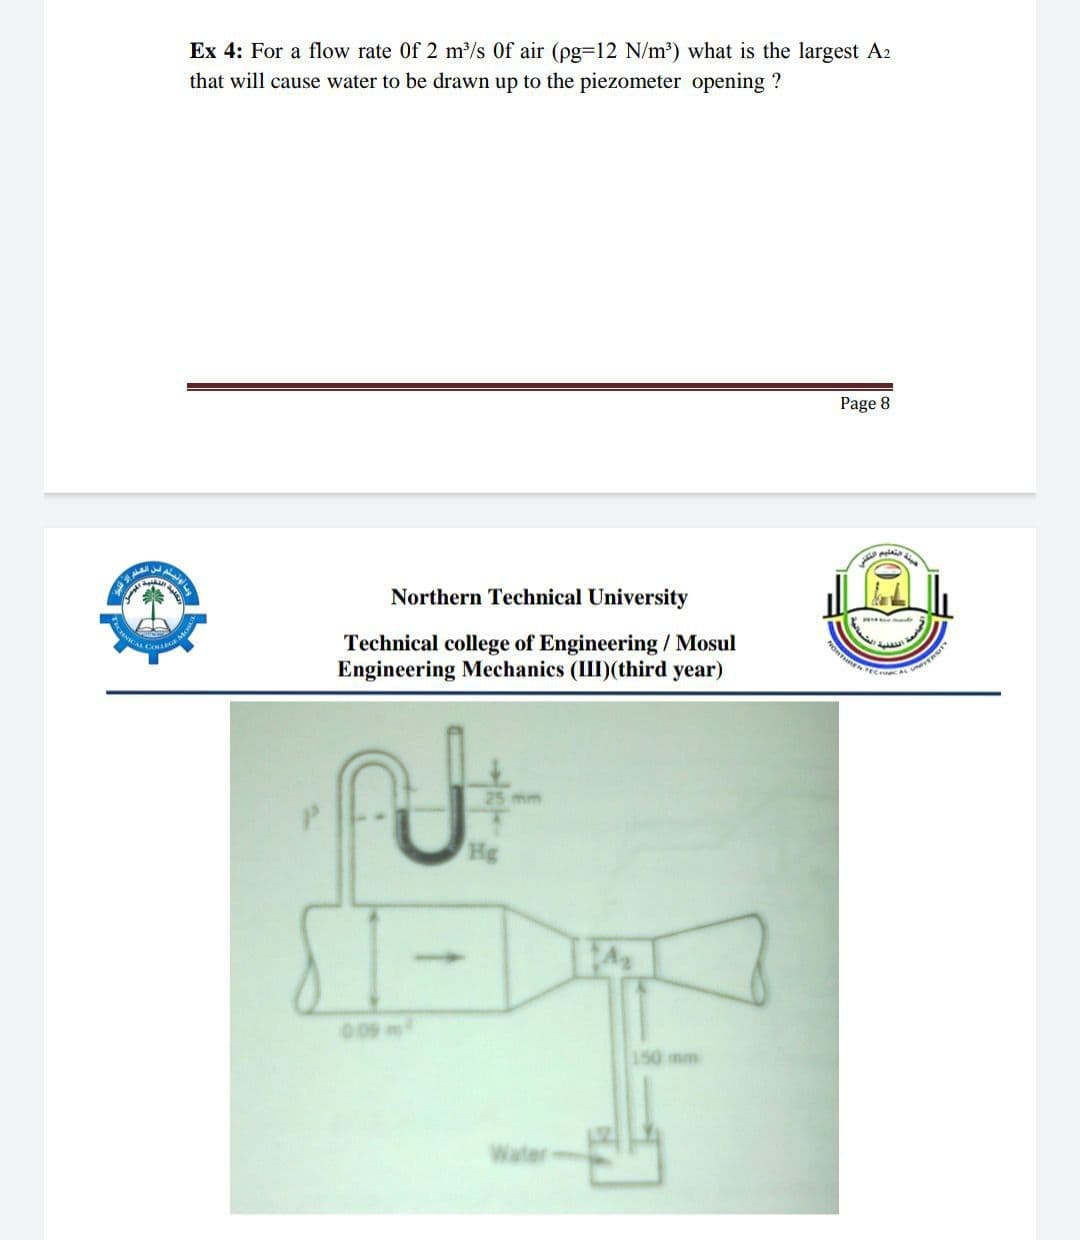 Ex 4: For a flow rate Of 2 m/s Of air (pg-12 N/m') what is the largest A2
that will cause water to be drawn up to the piezometer opening ?
Page 8
Northern Technical University
Technical college of Engineering / Mosul
Engineering Mechanics (II)(third year)
25 mm
009 m
150 mm
Water
